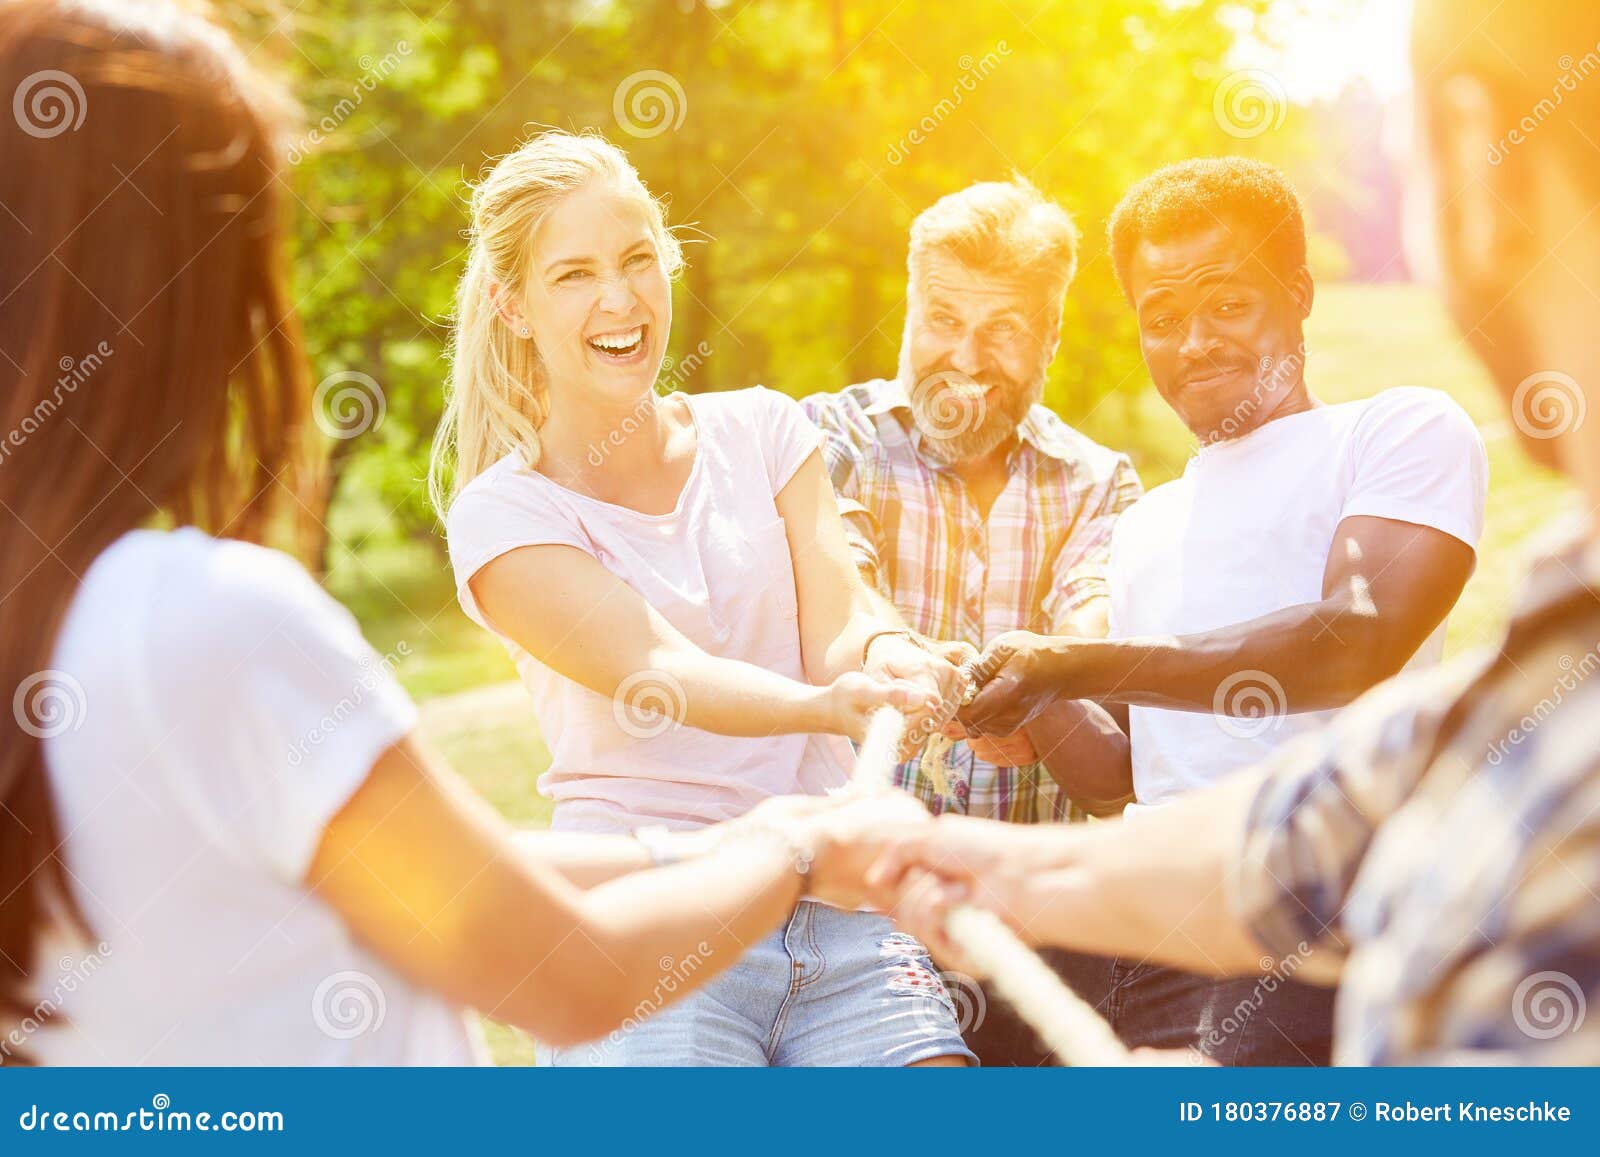 Team in Tug-of-war As a Team Building Event Stock Image - Image of ...